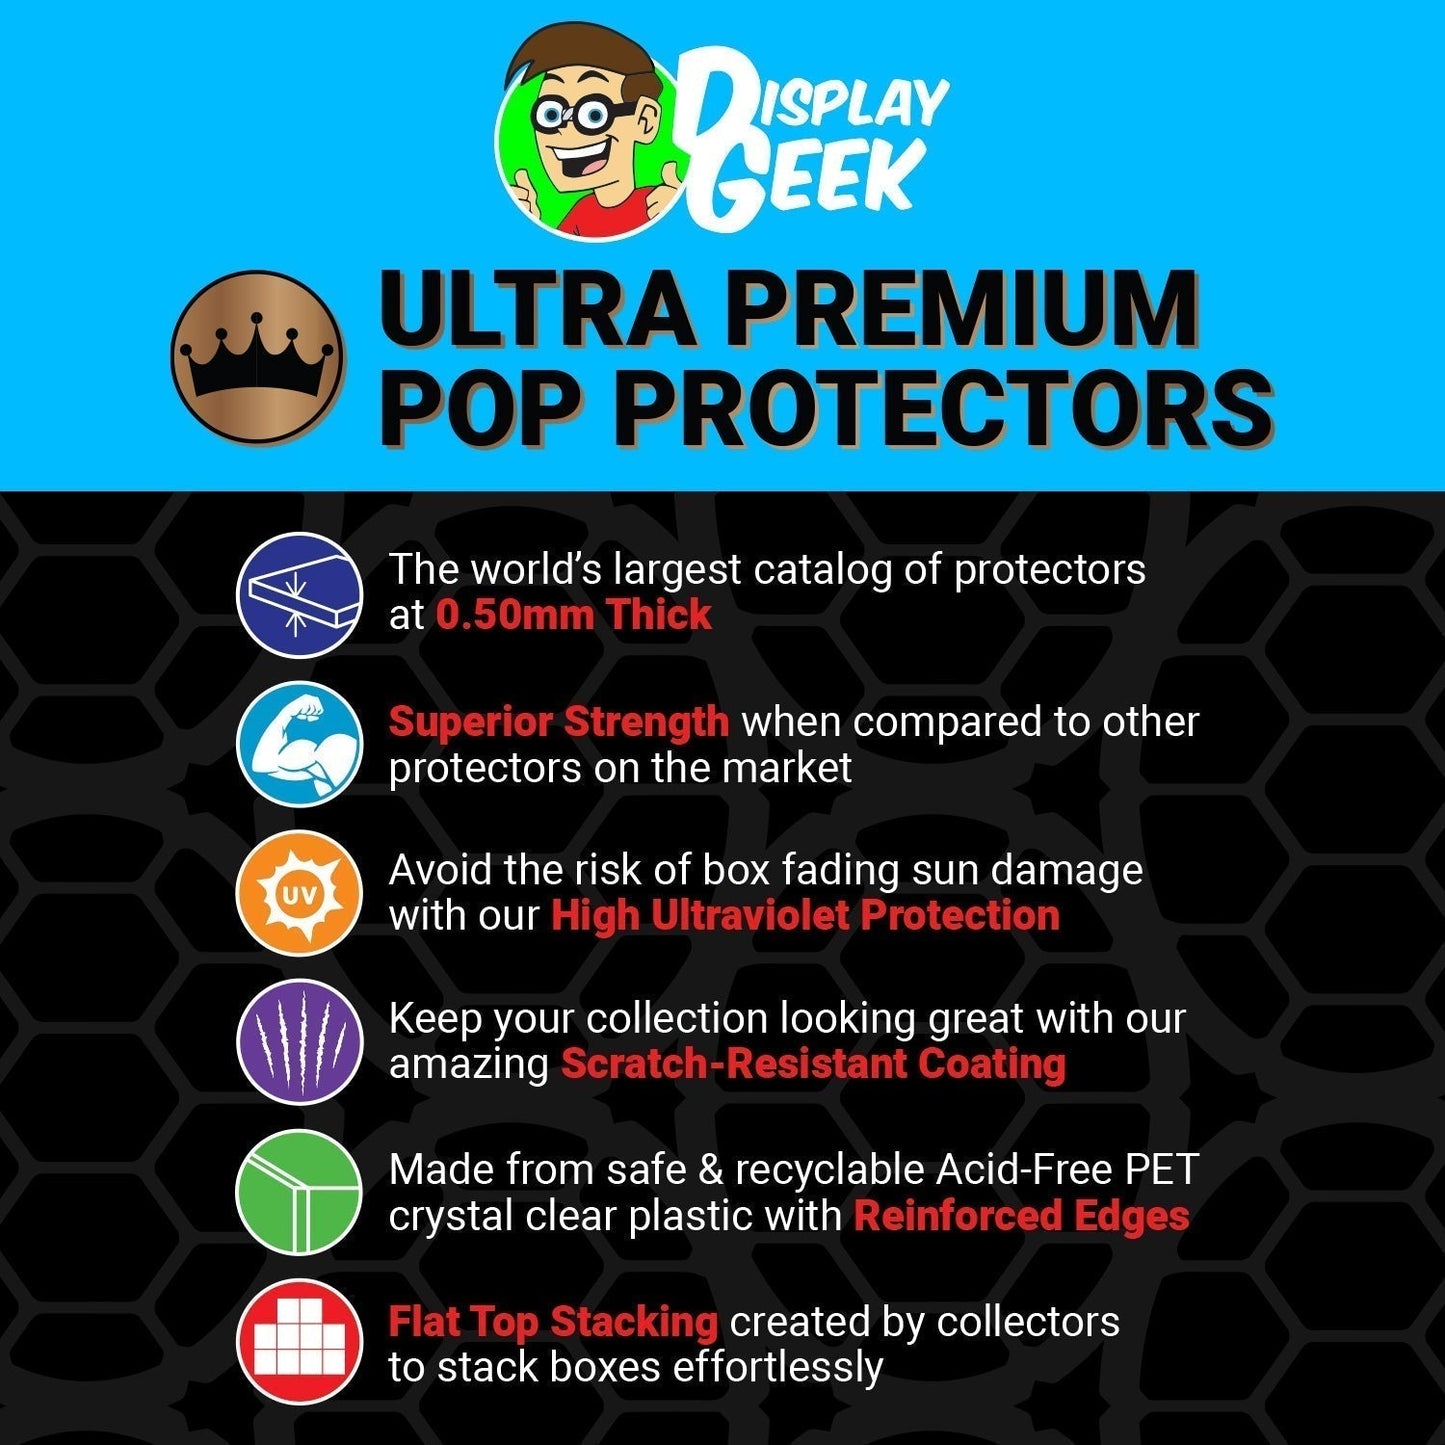 Pop Protector for 6 inch Alien Queen #1171 Super Funko Pop - PPG Pop Protector Guide Search Created by Display Geek